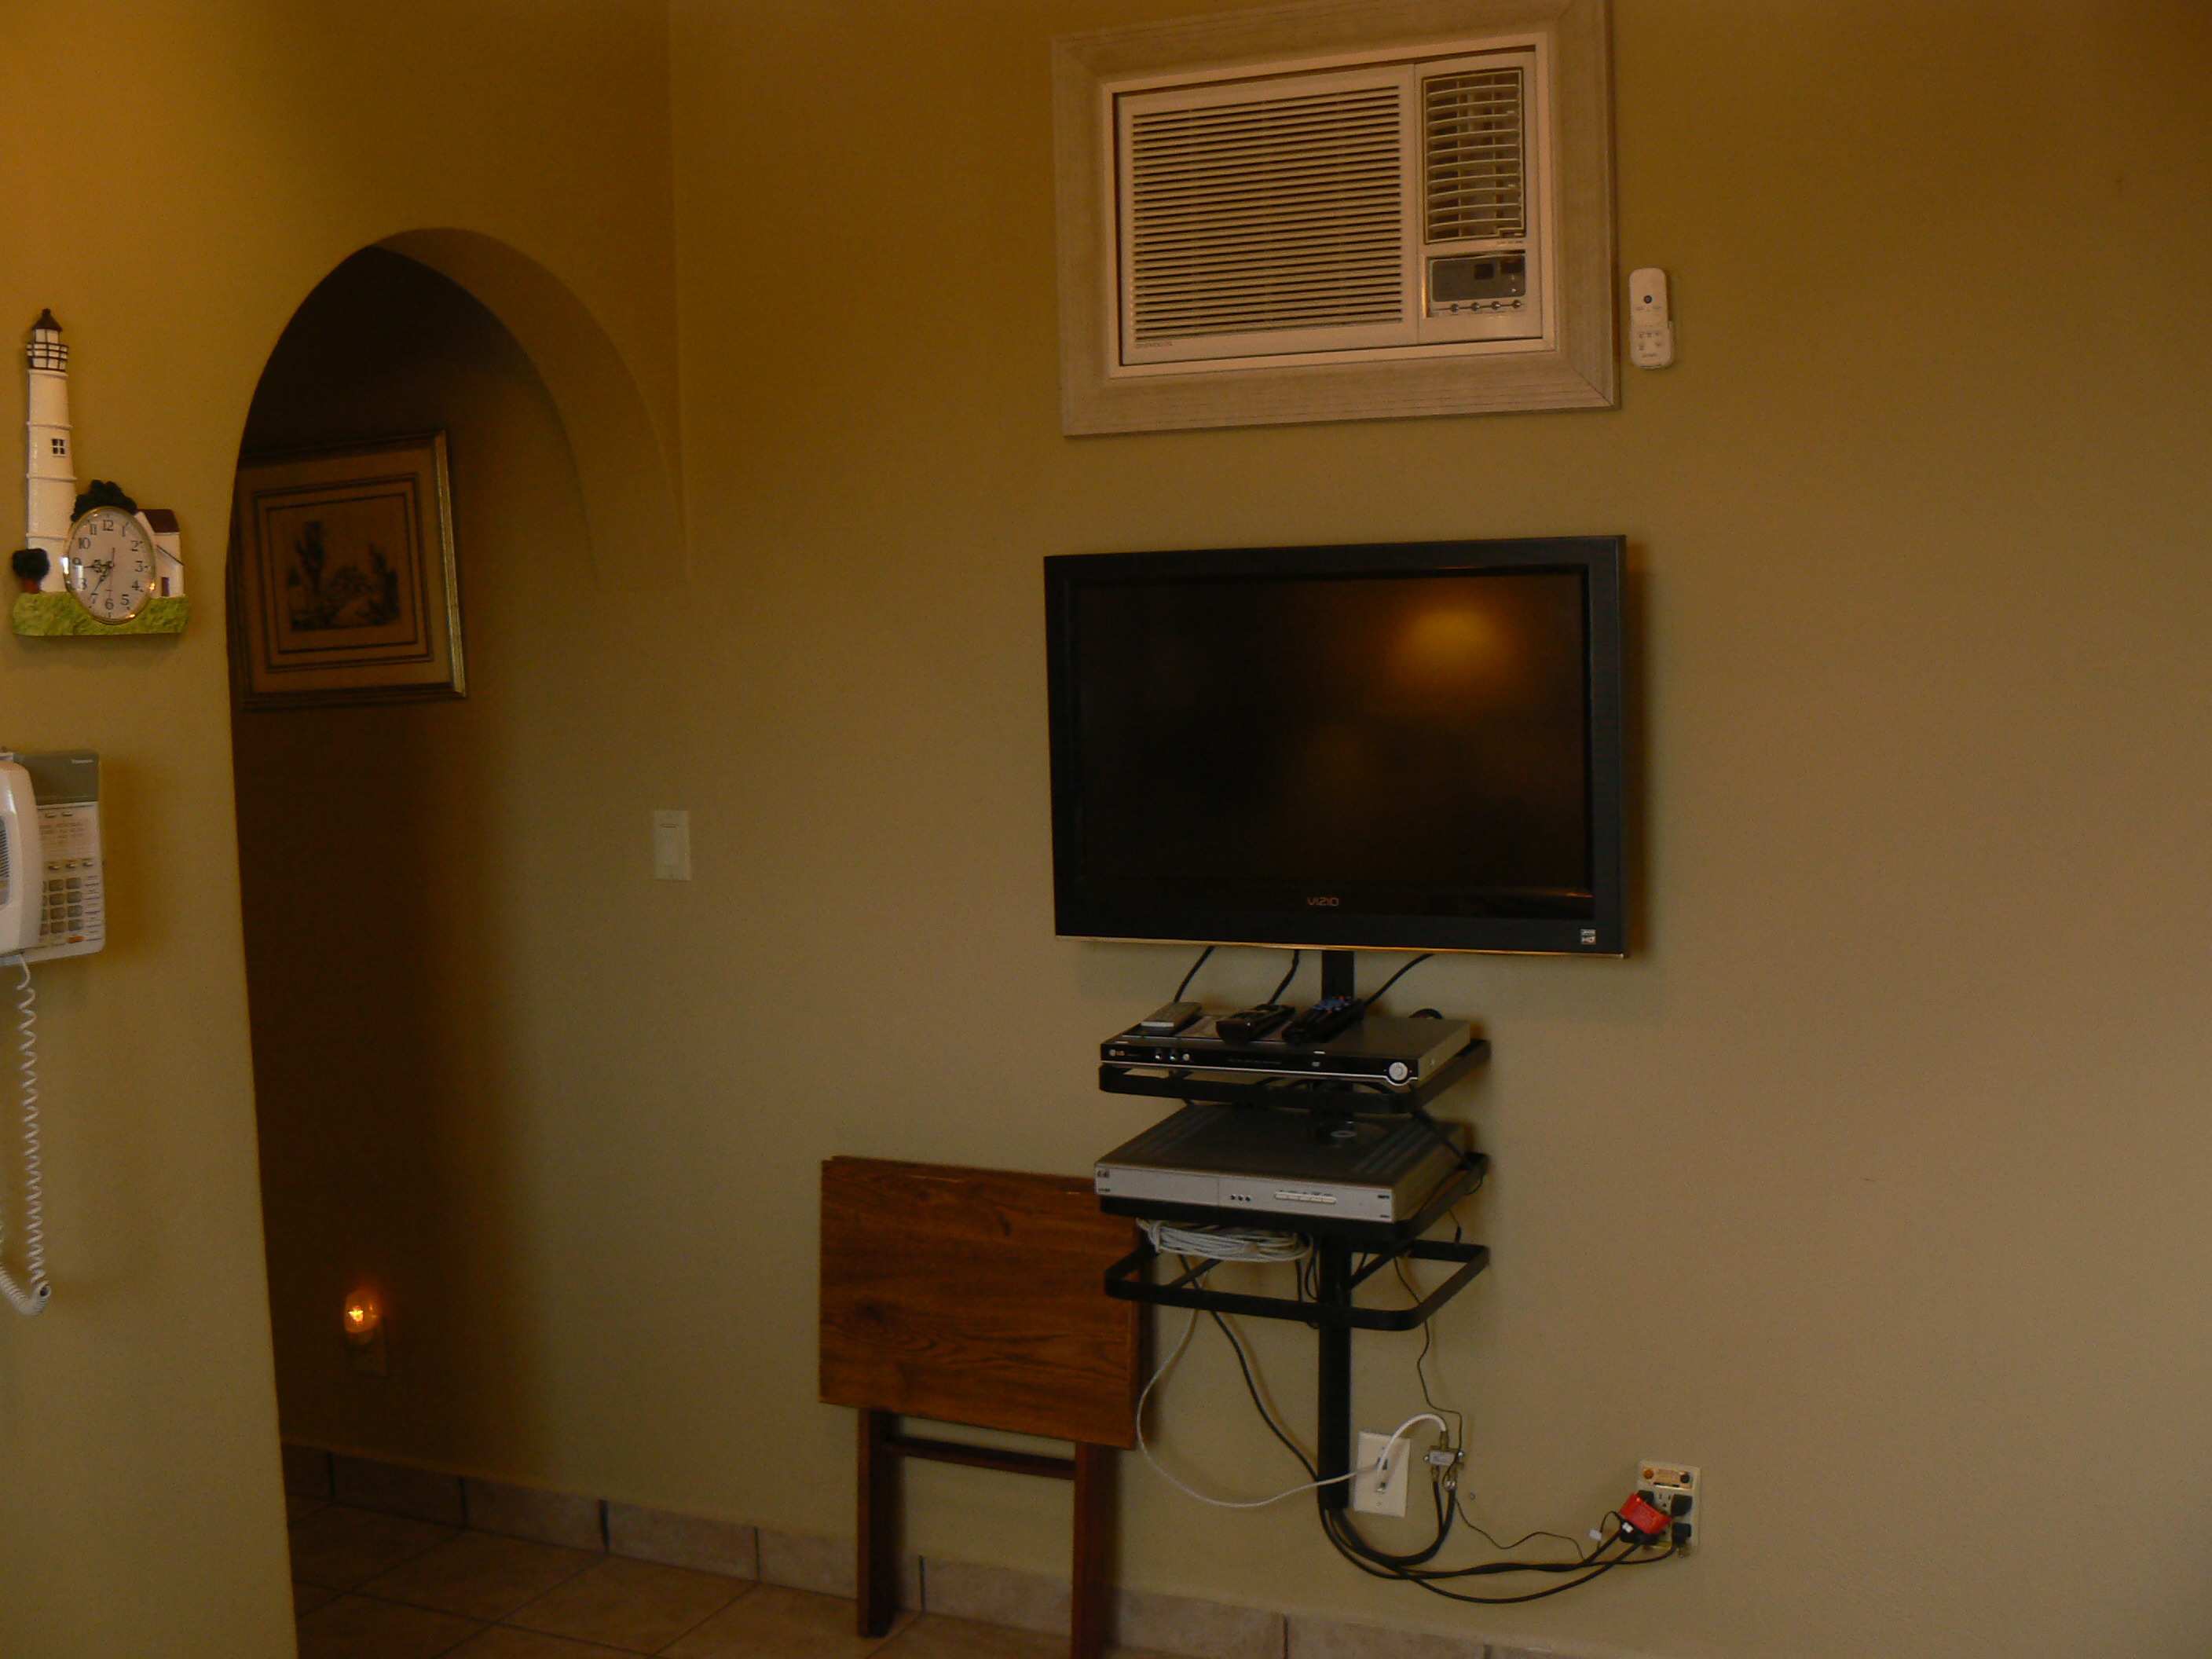 Visio 32 HDTV with DVD Player. Local Cabel and Sat. TV